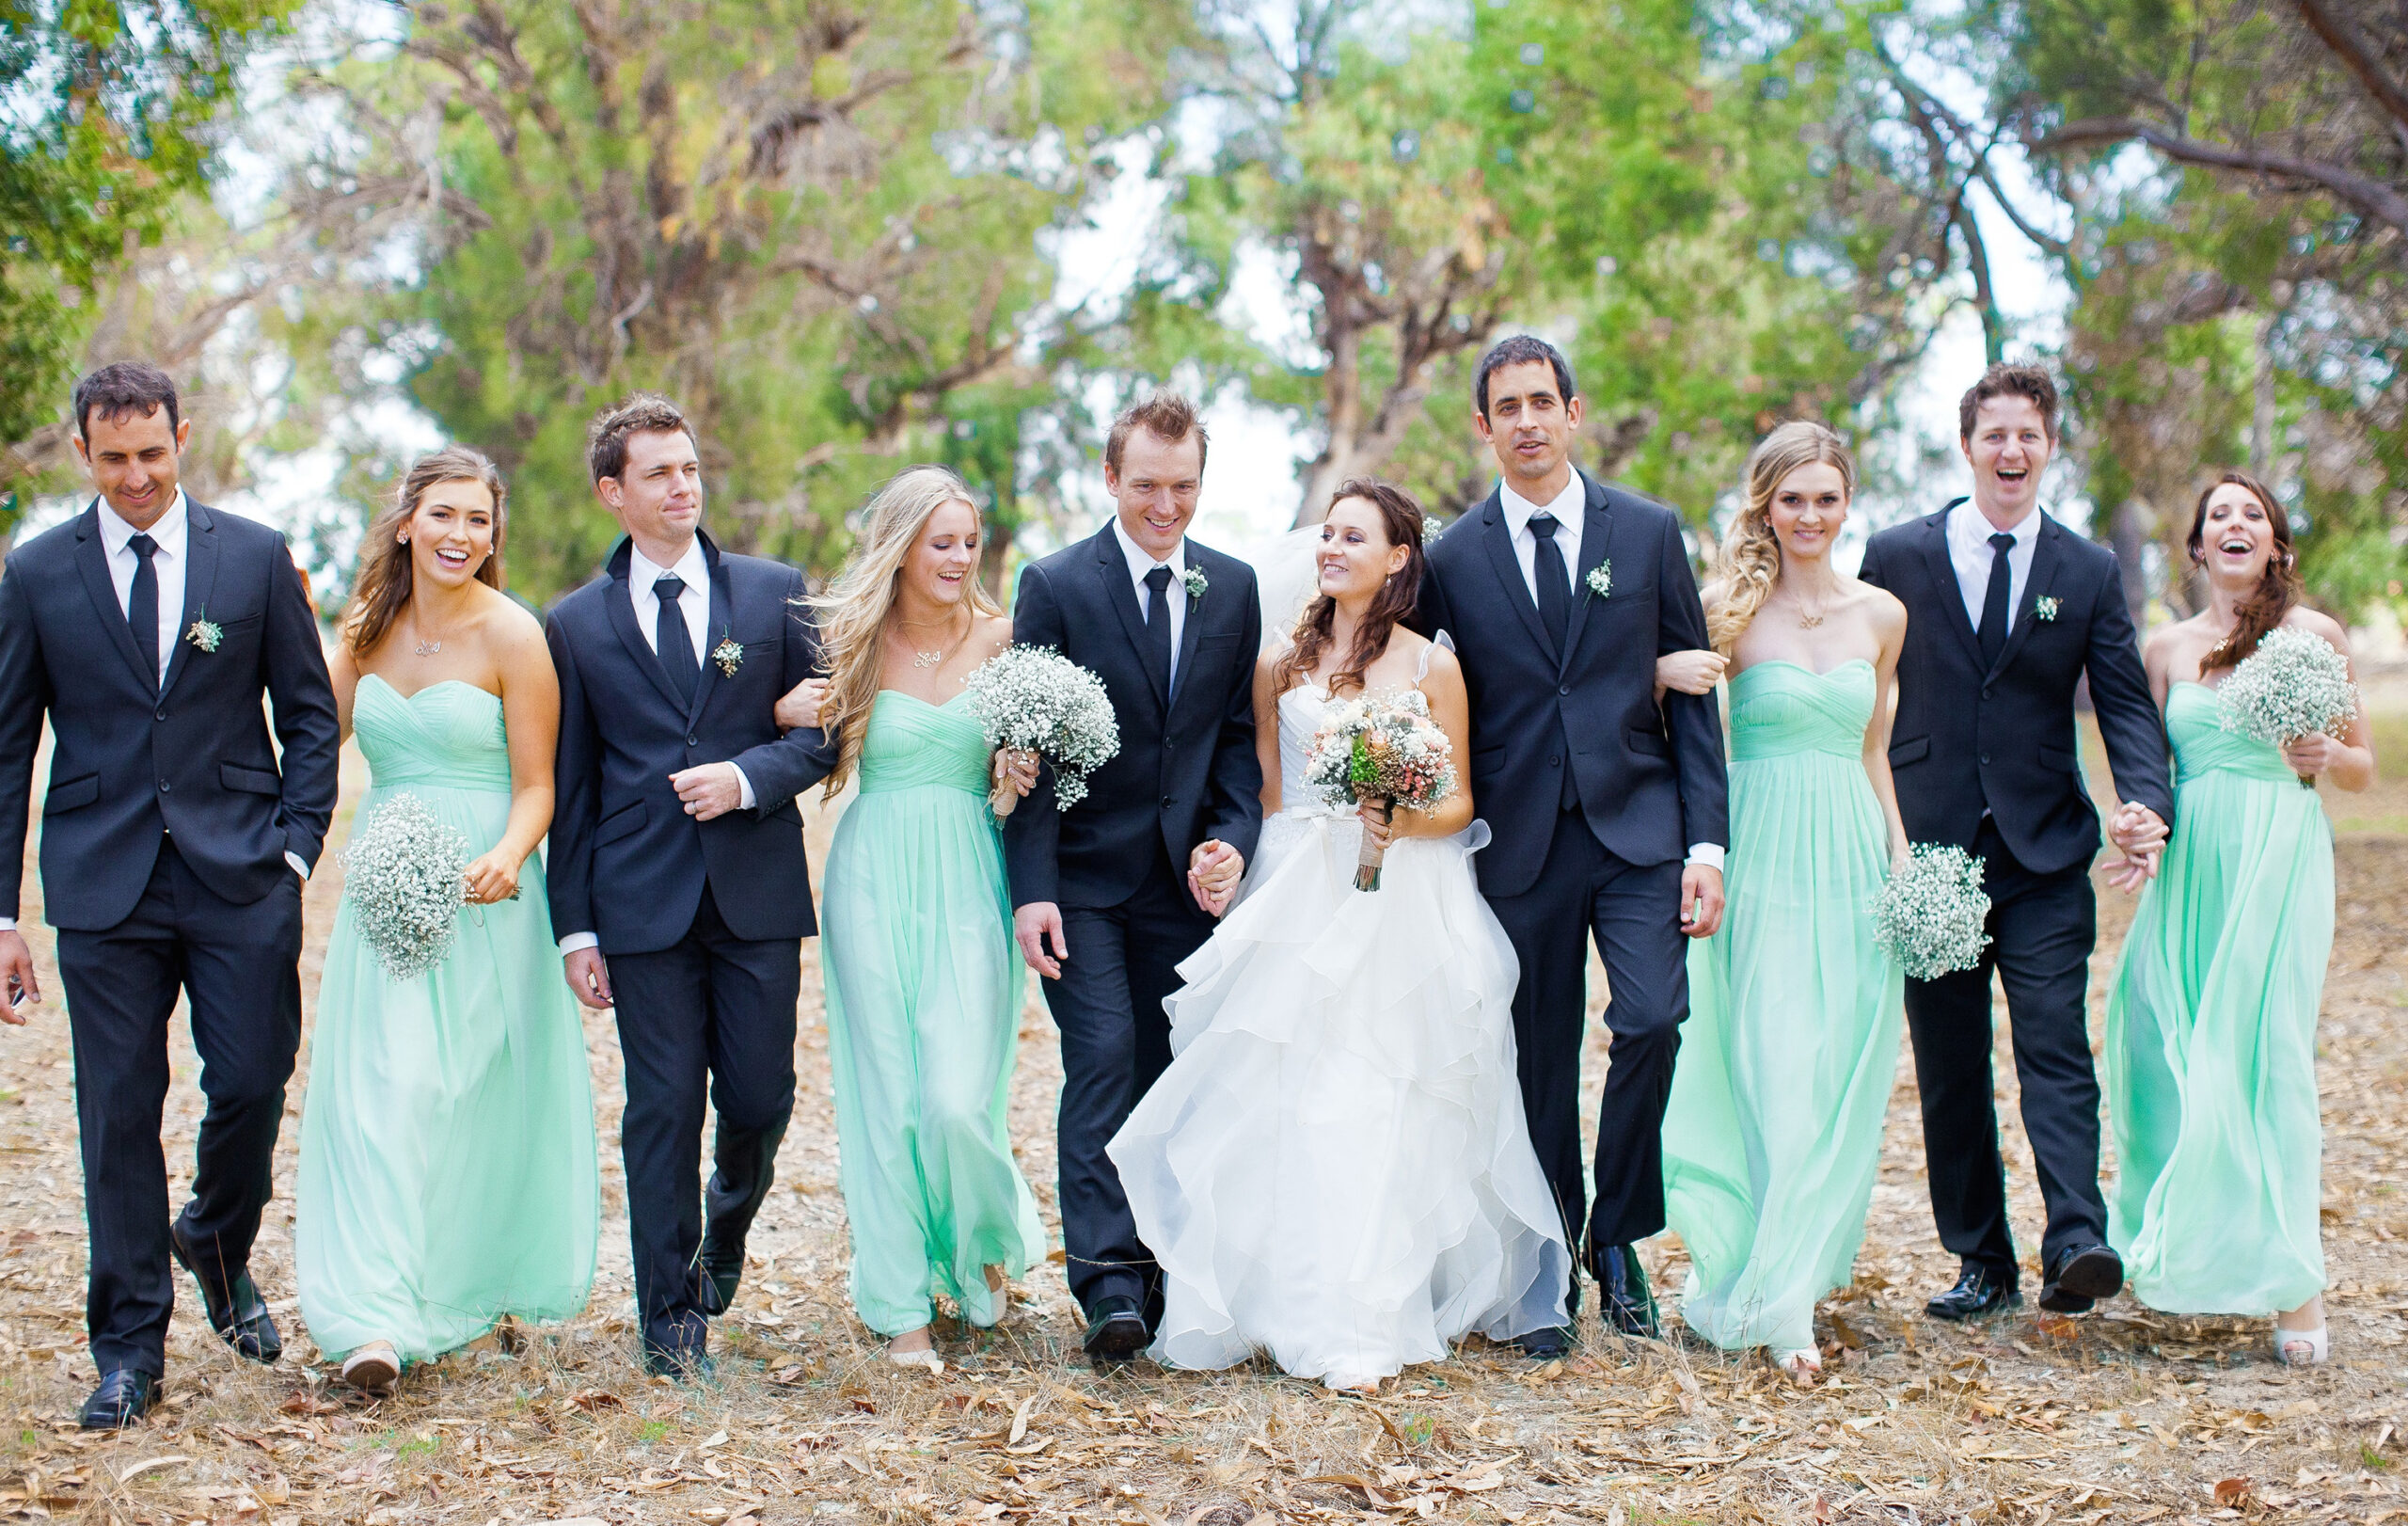 View More: http://kirsty-russell.pass.us/caitlin--wills-wedding